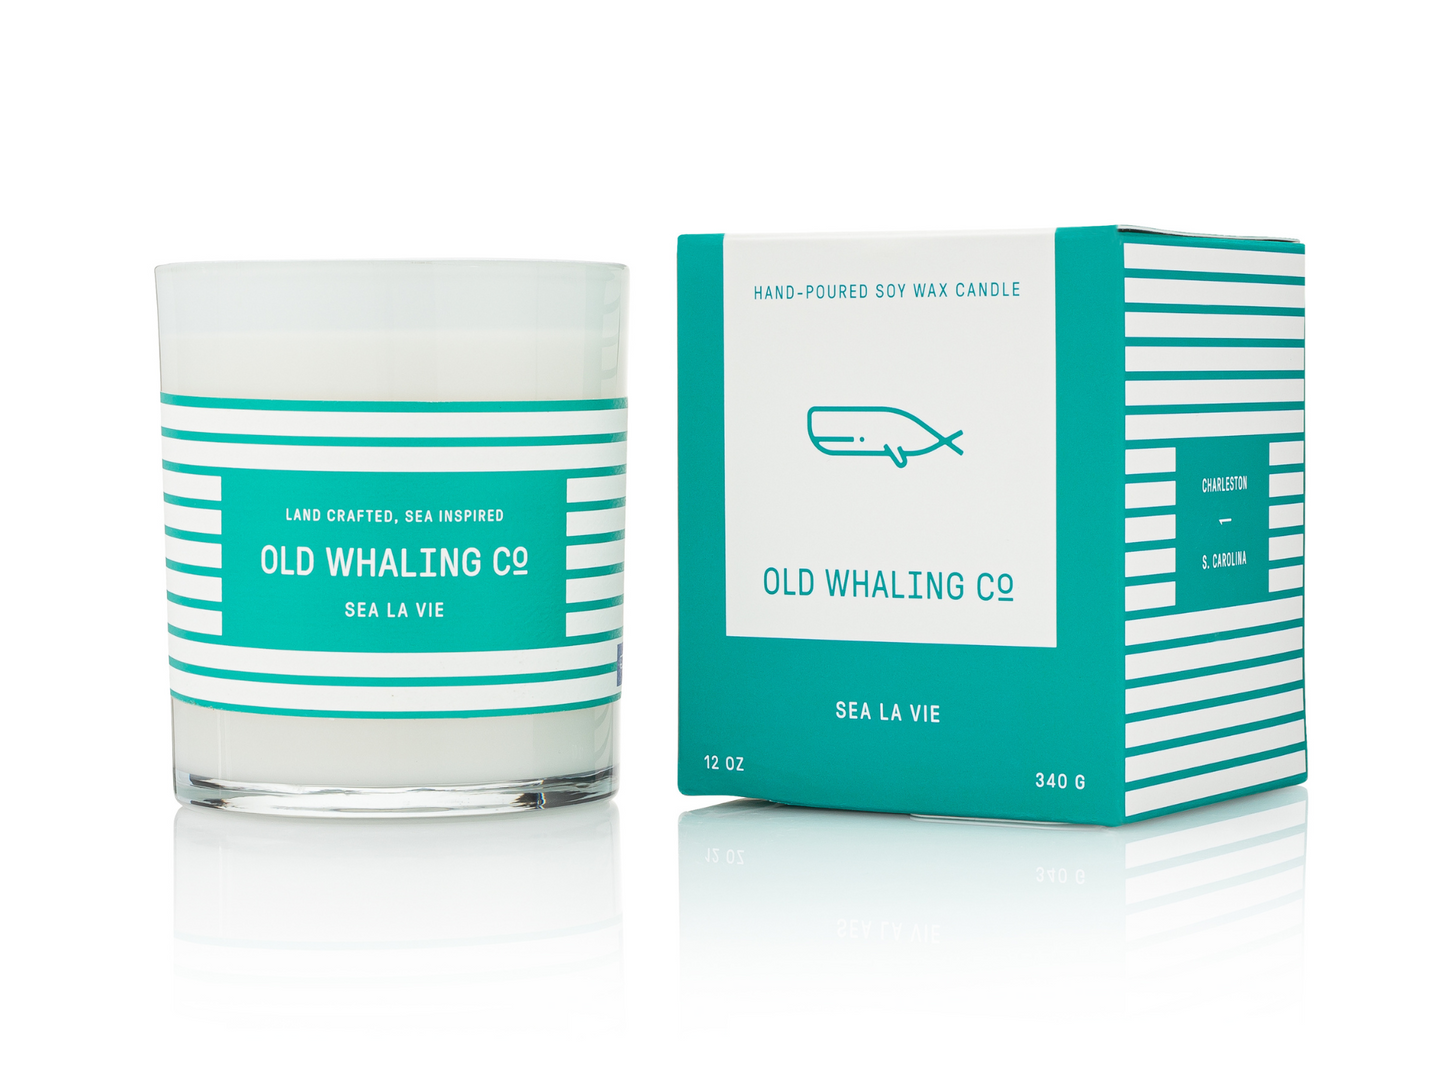 Old Whaling Co Sea La Vie Candle